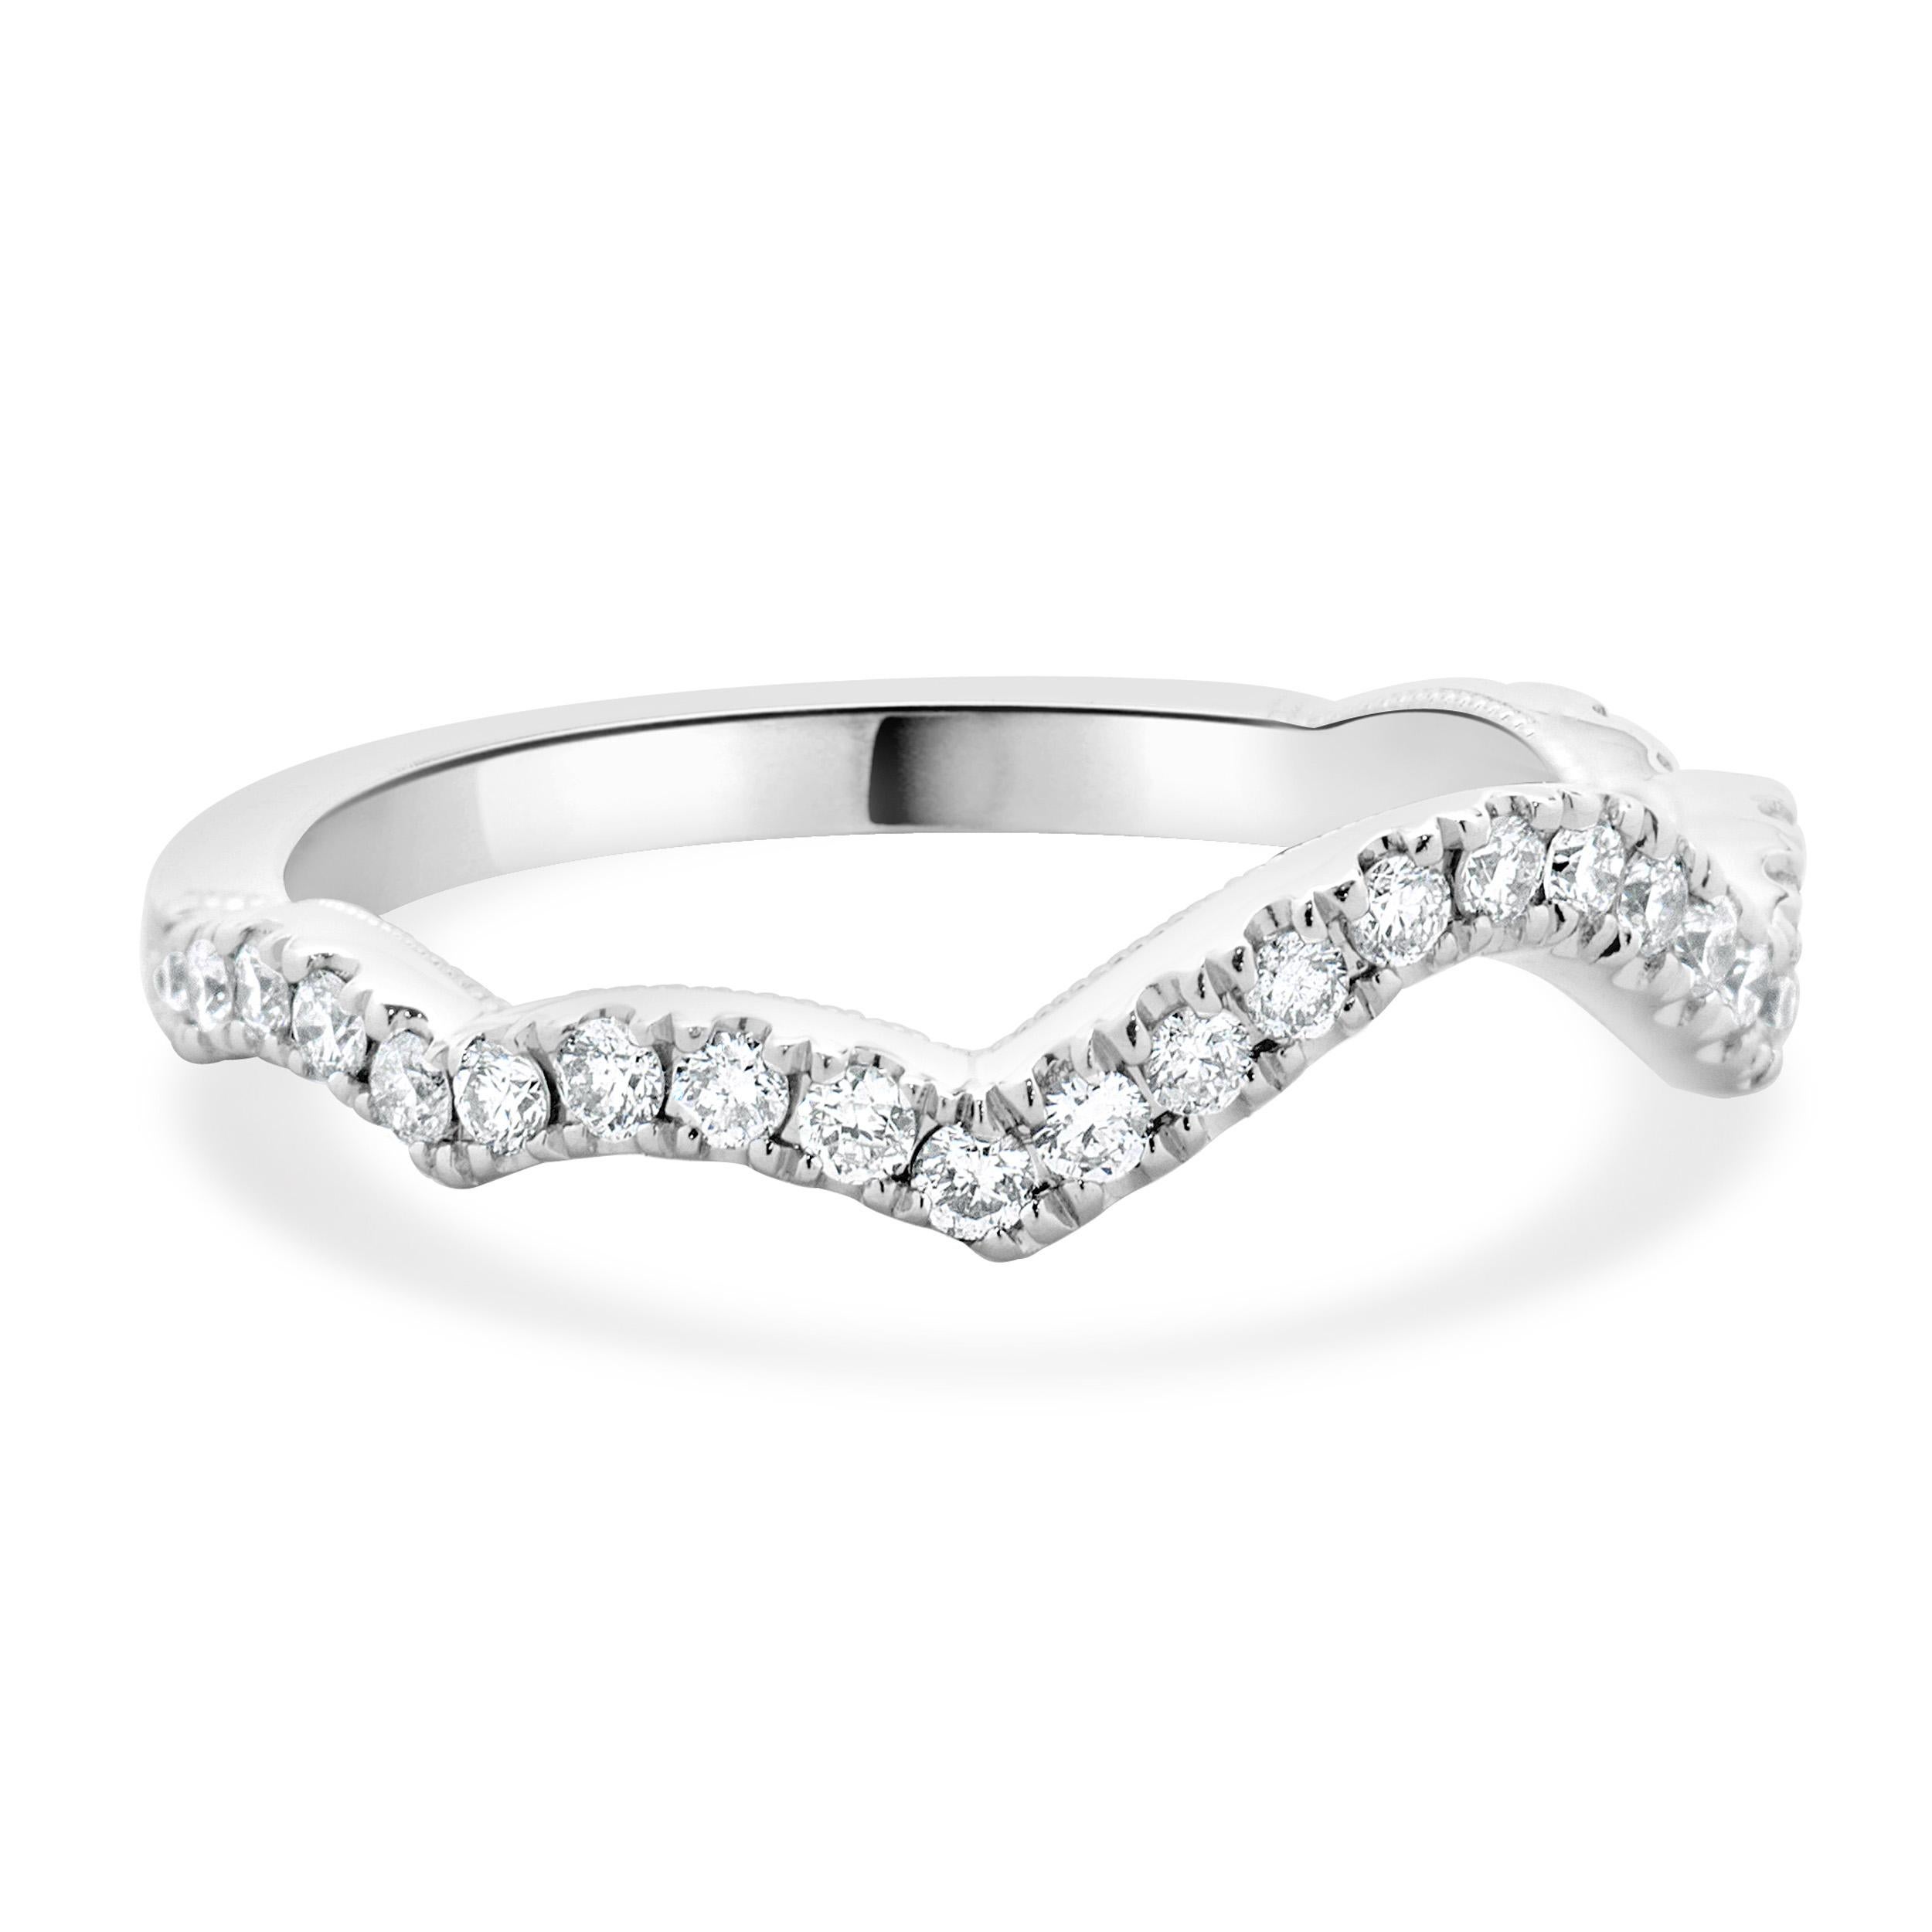 14 Karat White Gold Scalloped Diamond Band In Excellent Condition For Sale In Scottsdale, AZ